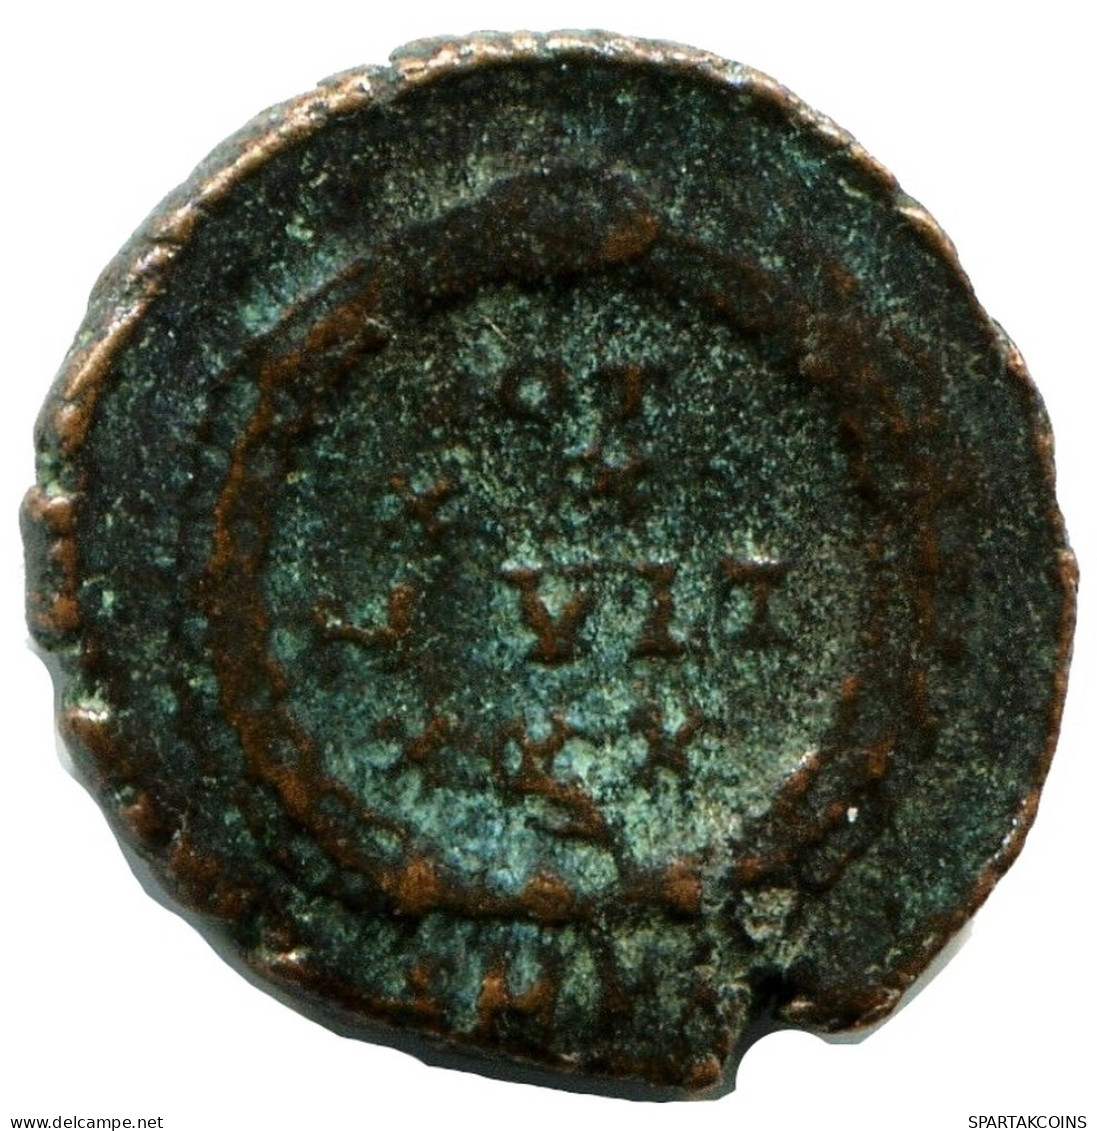 CONSTANS MINTED IN CYZICUS FOUND IN IHNASYAH HOARD EGYPT #ANC11702.14.D.A - L'Empire Chrétien (307 à 363)